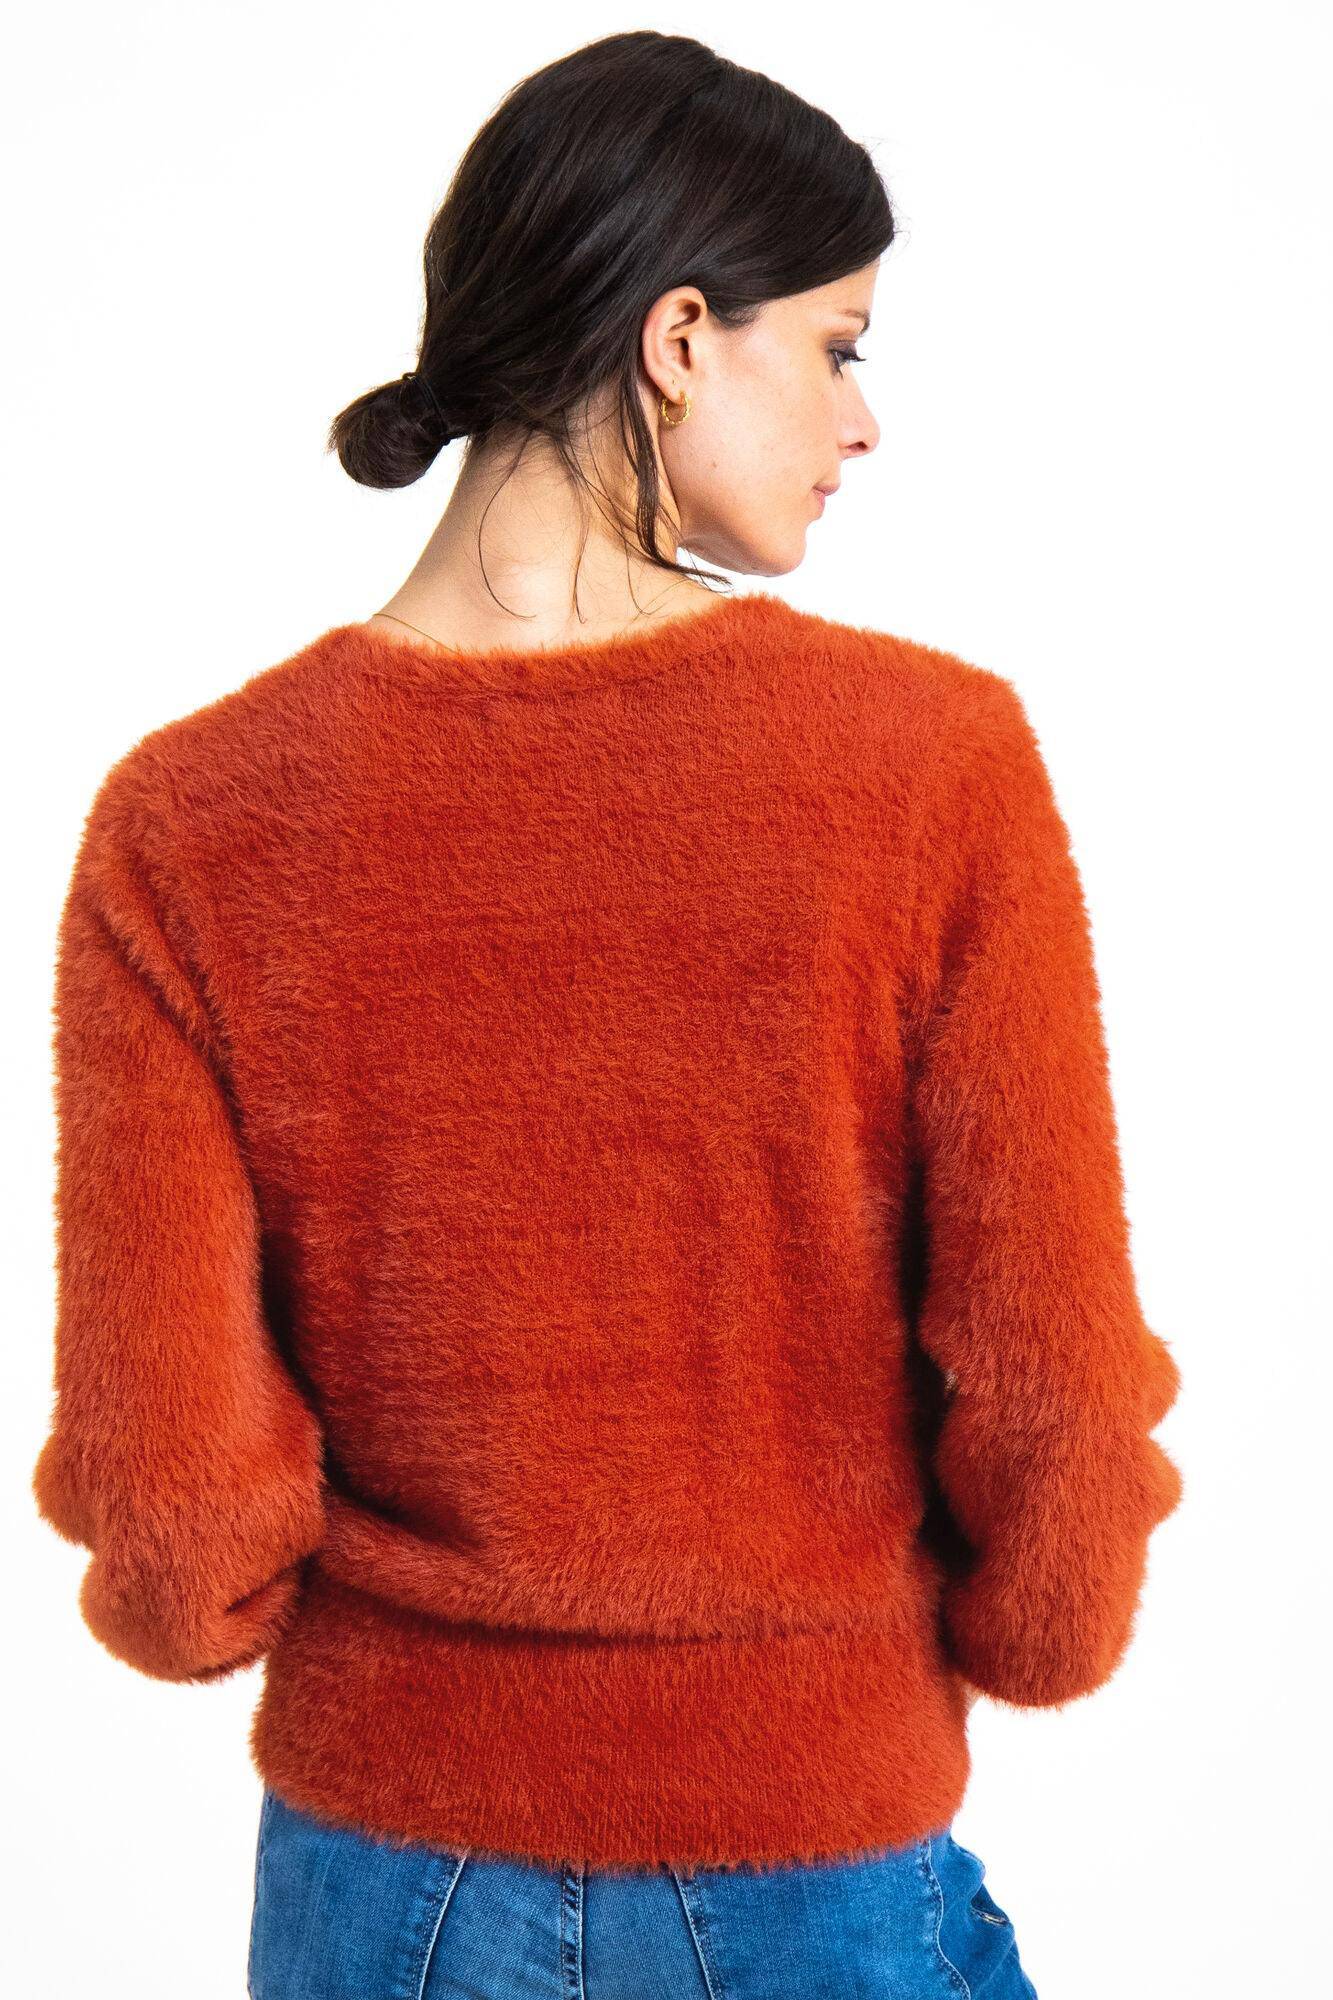 Garcia Red Fluffy Sweater - Your Style Your Story